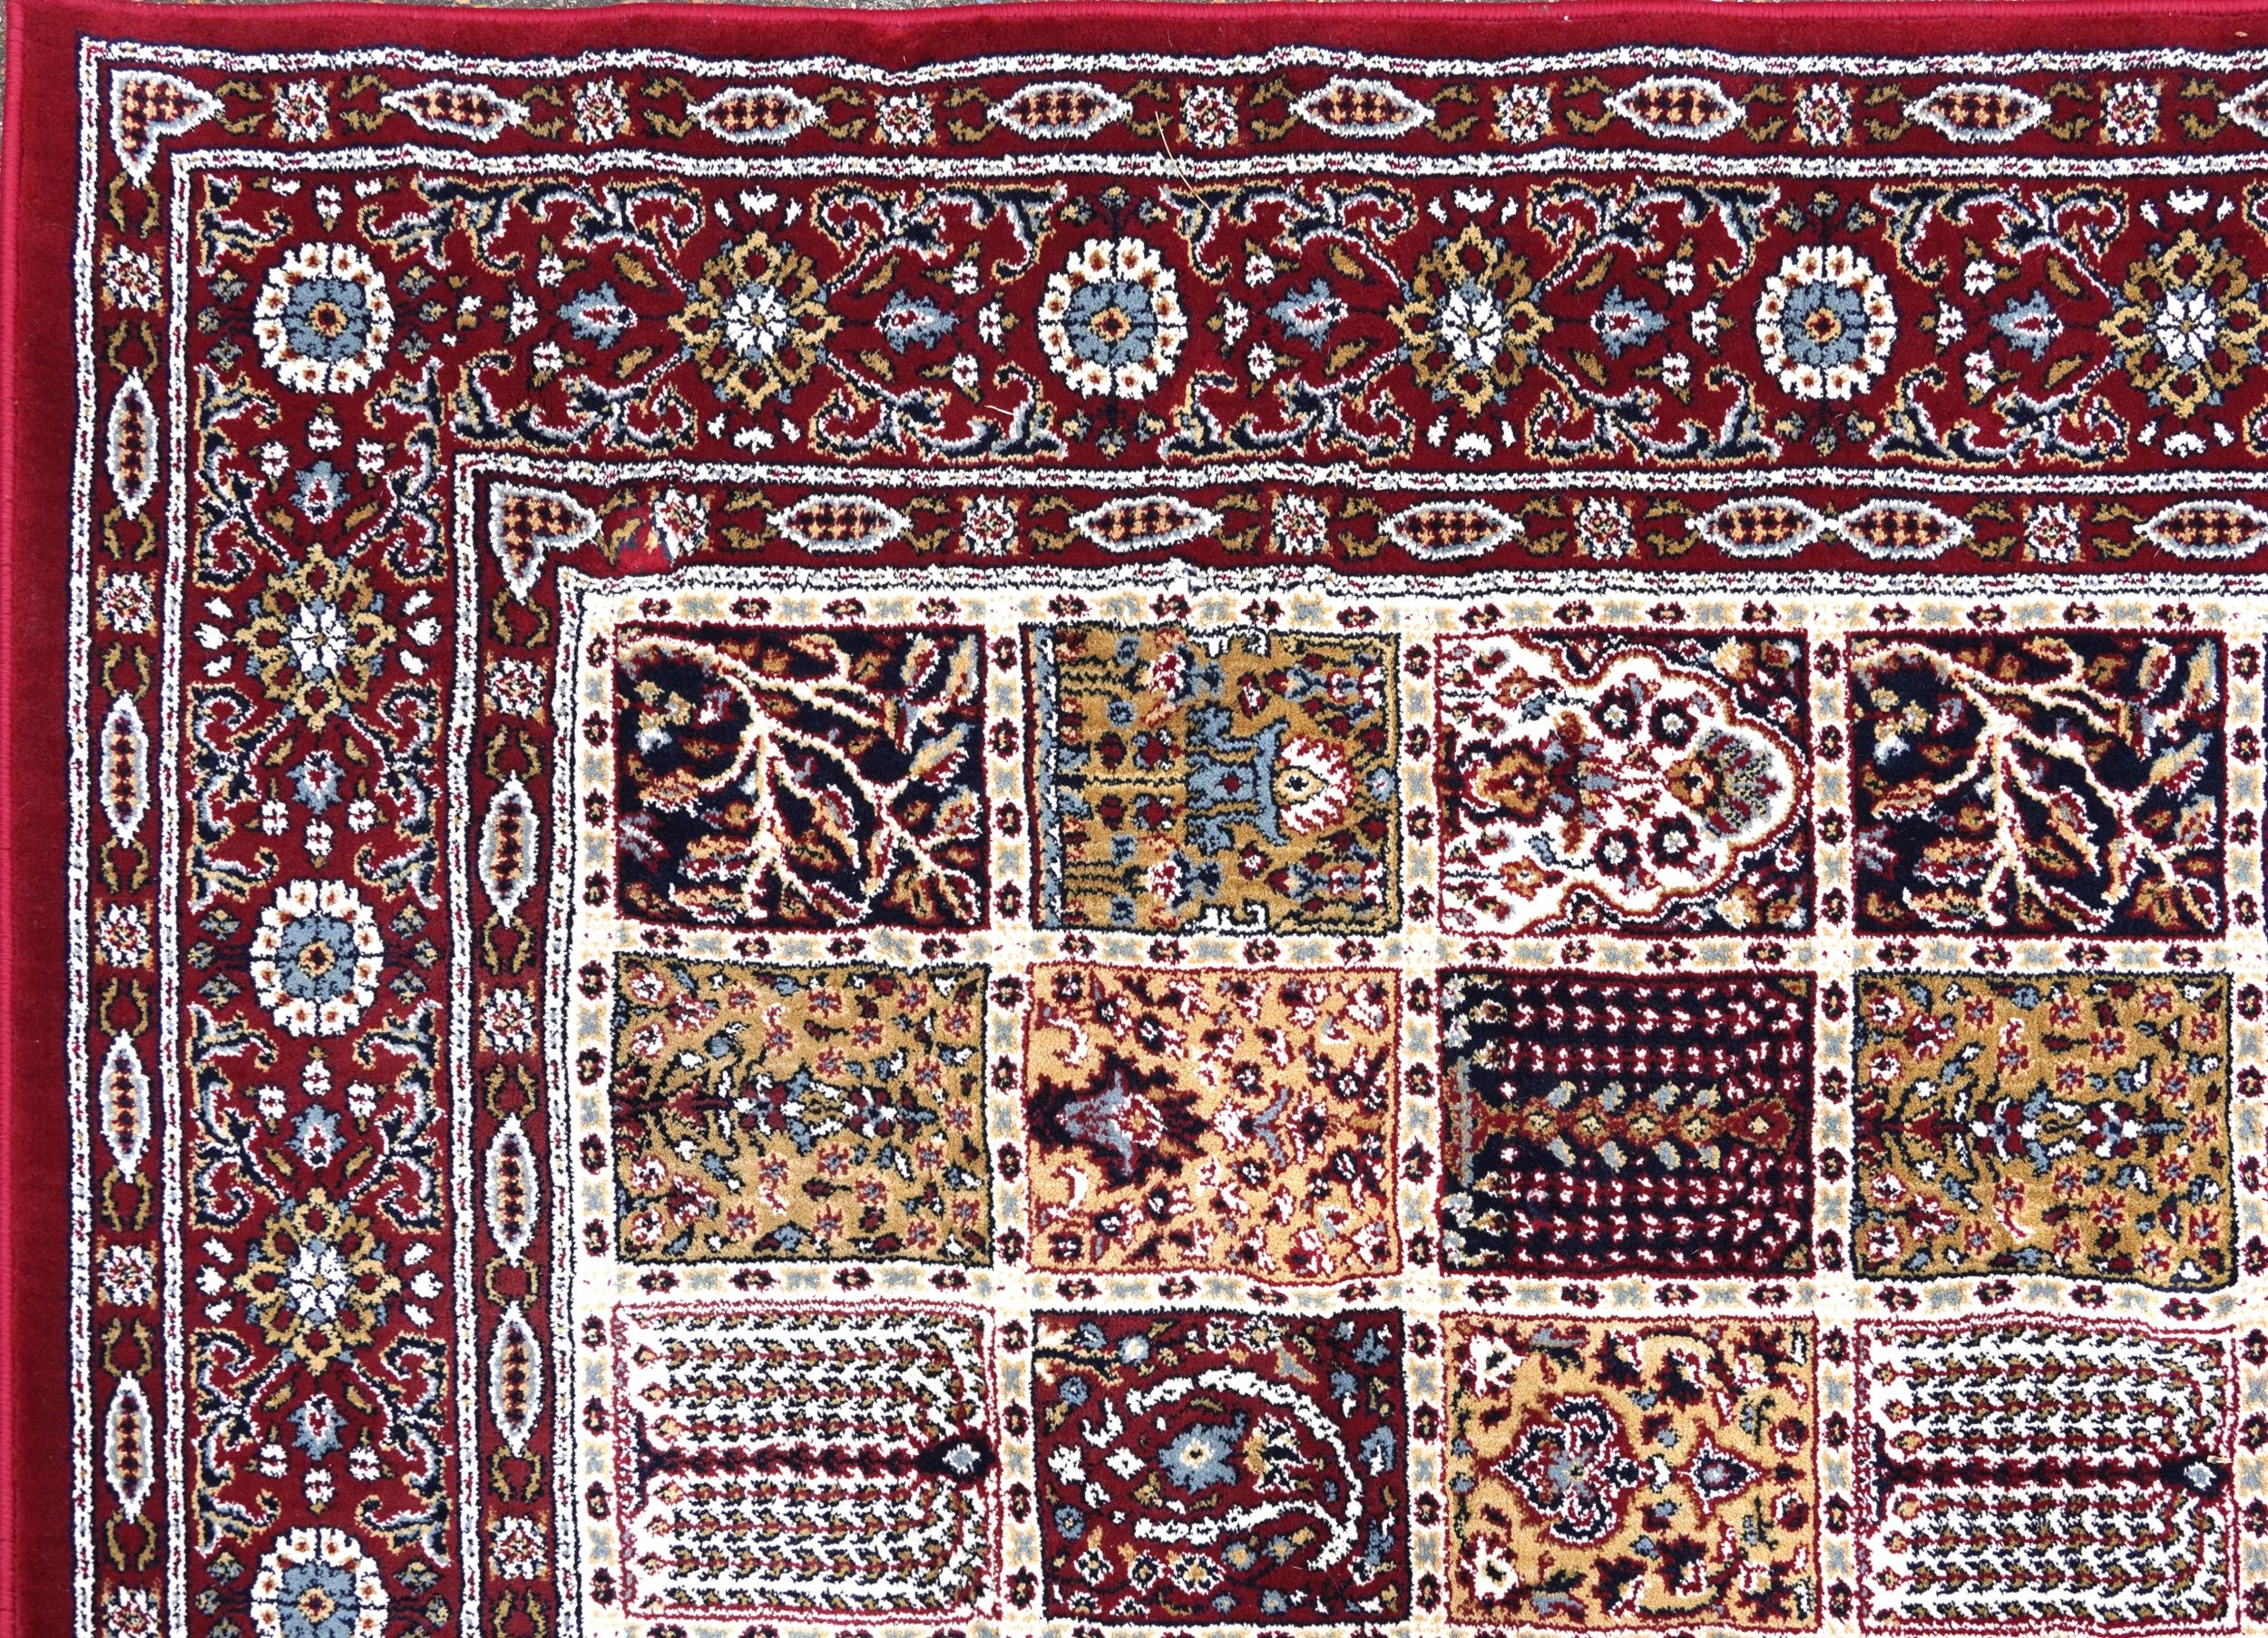 Pair of rectangular Persian style Valby Ruta rugs, each 195cm x 133cm - Image 9 of 13